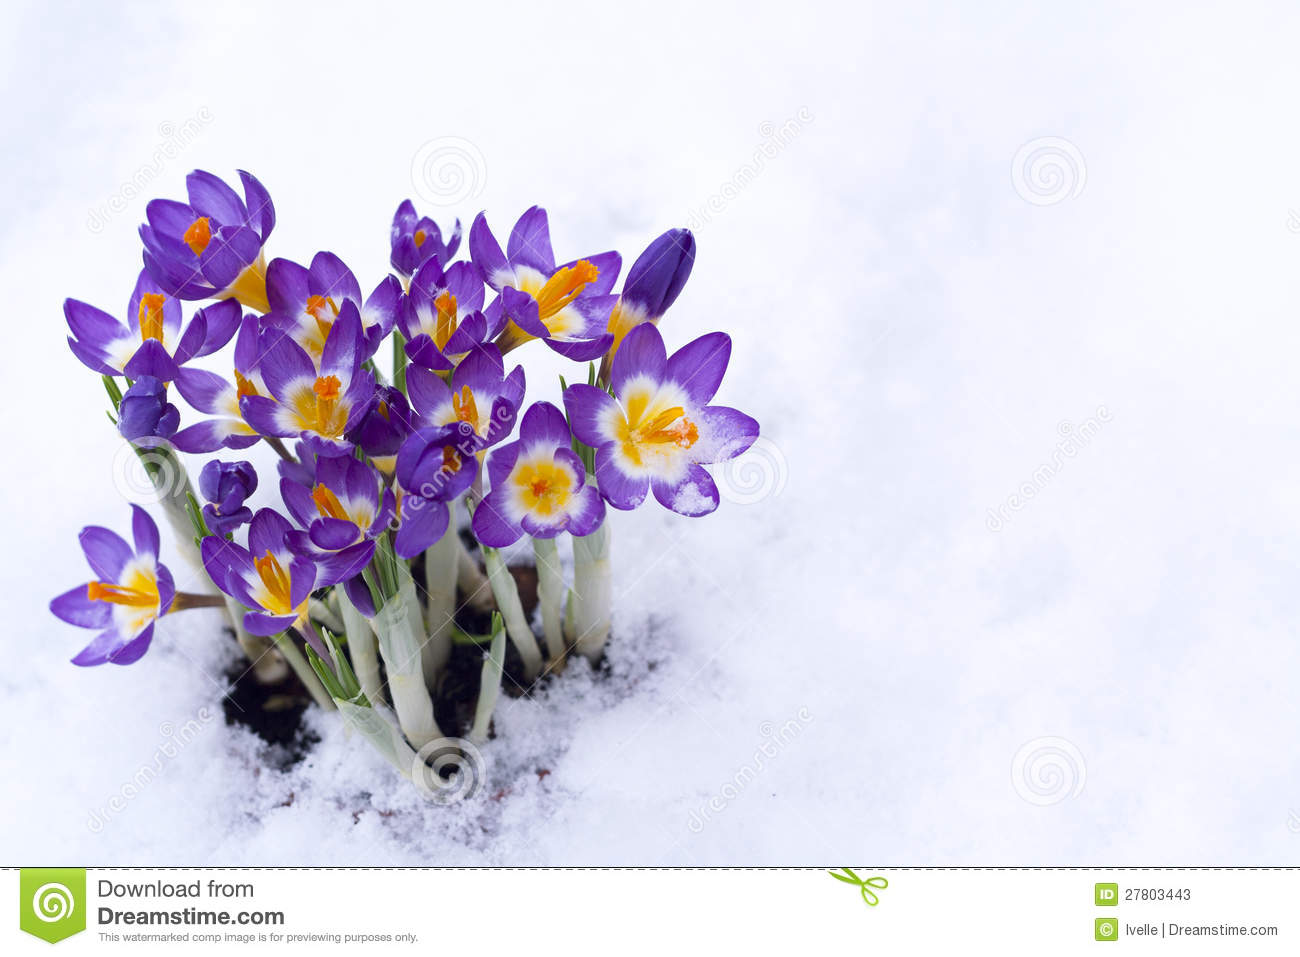 Early spring clipart - Clipground